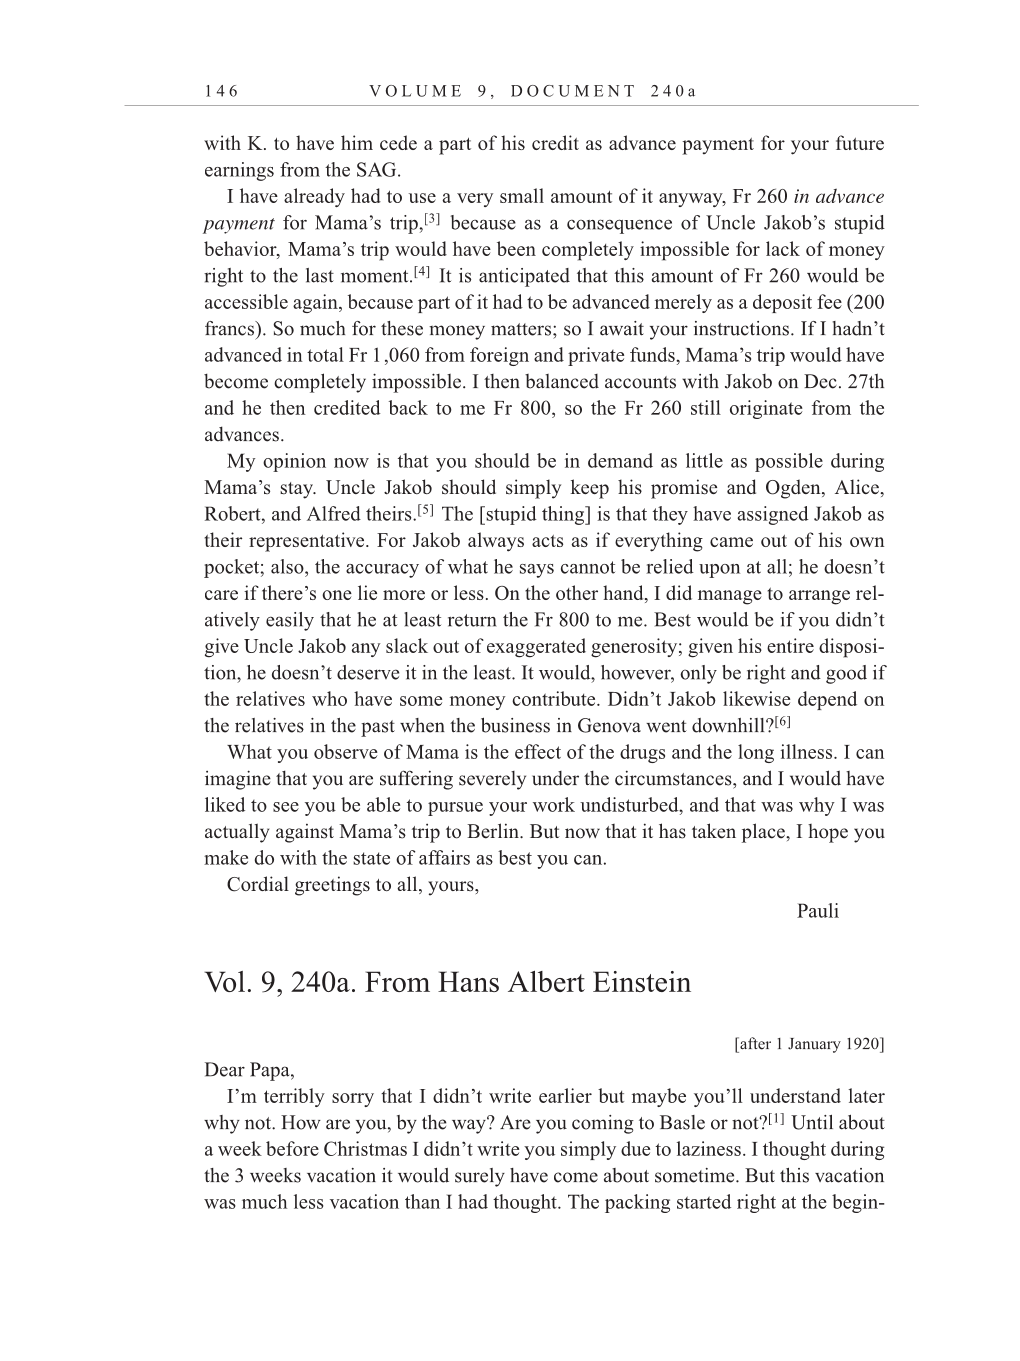 Volume 10: The Berlin Years: Correspondence, May-December 1920, and Supplementary Correspondence, 1909-1920 (English translation supplement) page 146